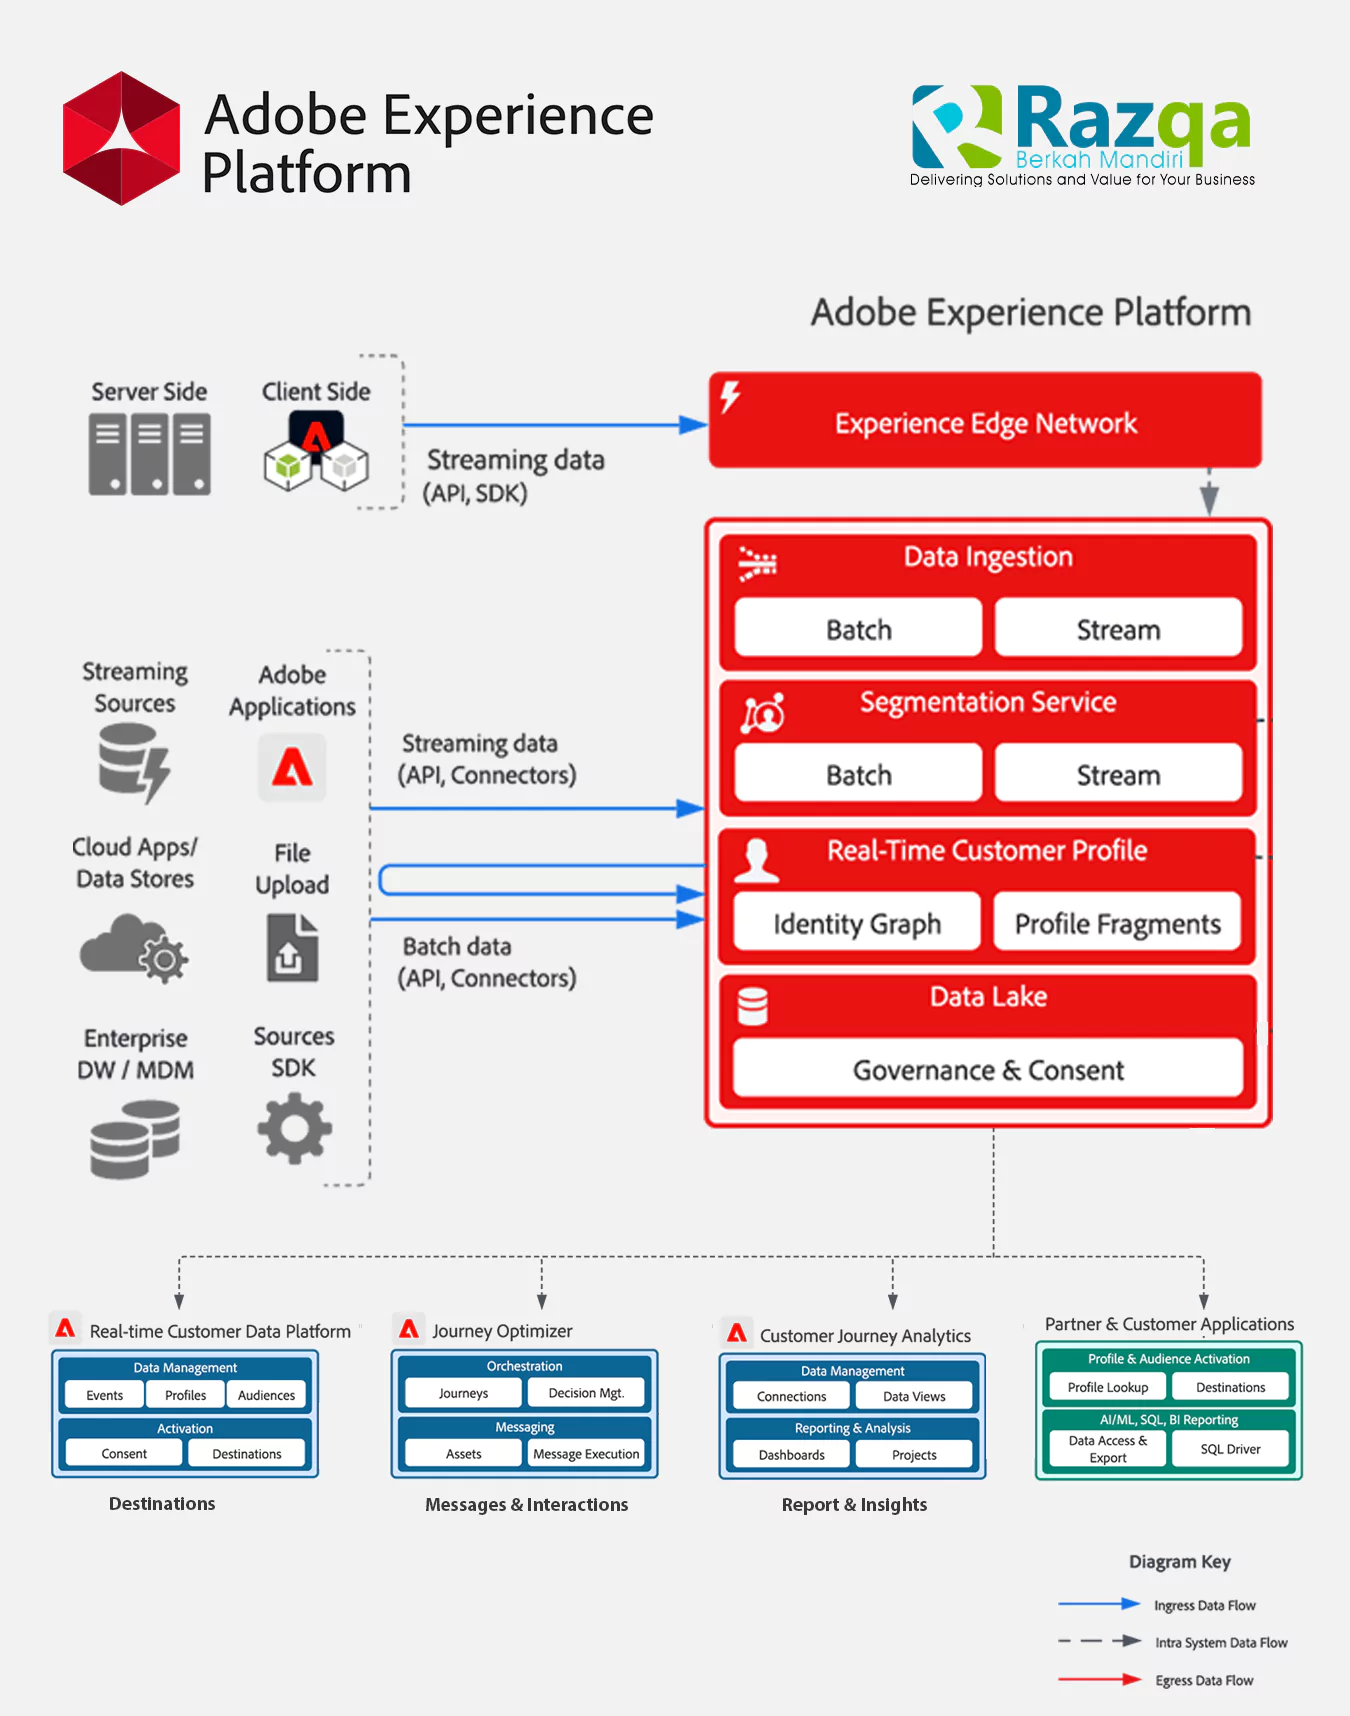 Elevate Experiences with Adobe Experience Platform